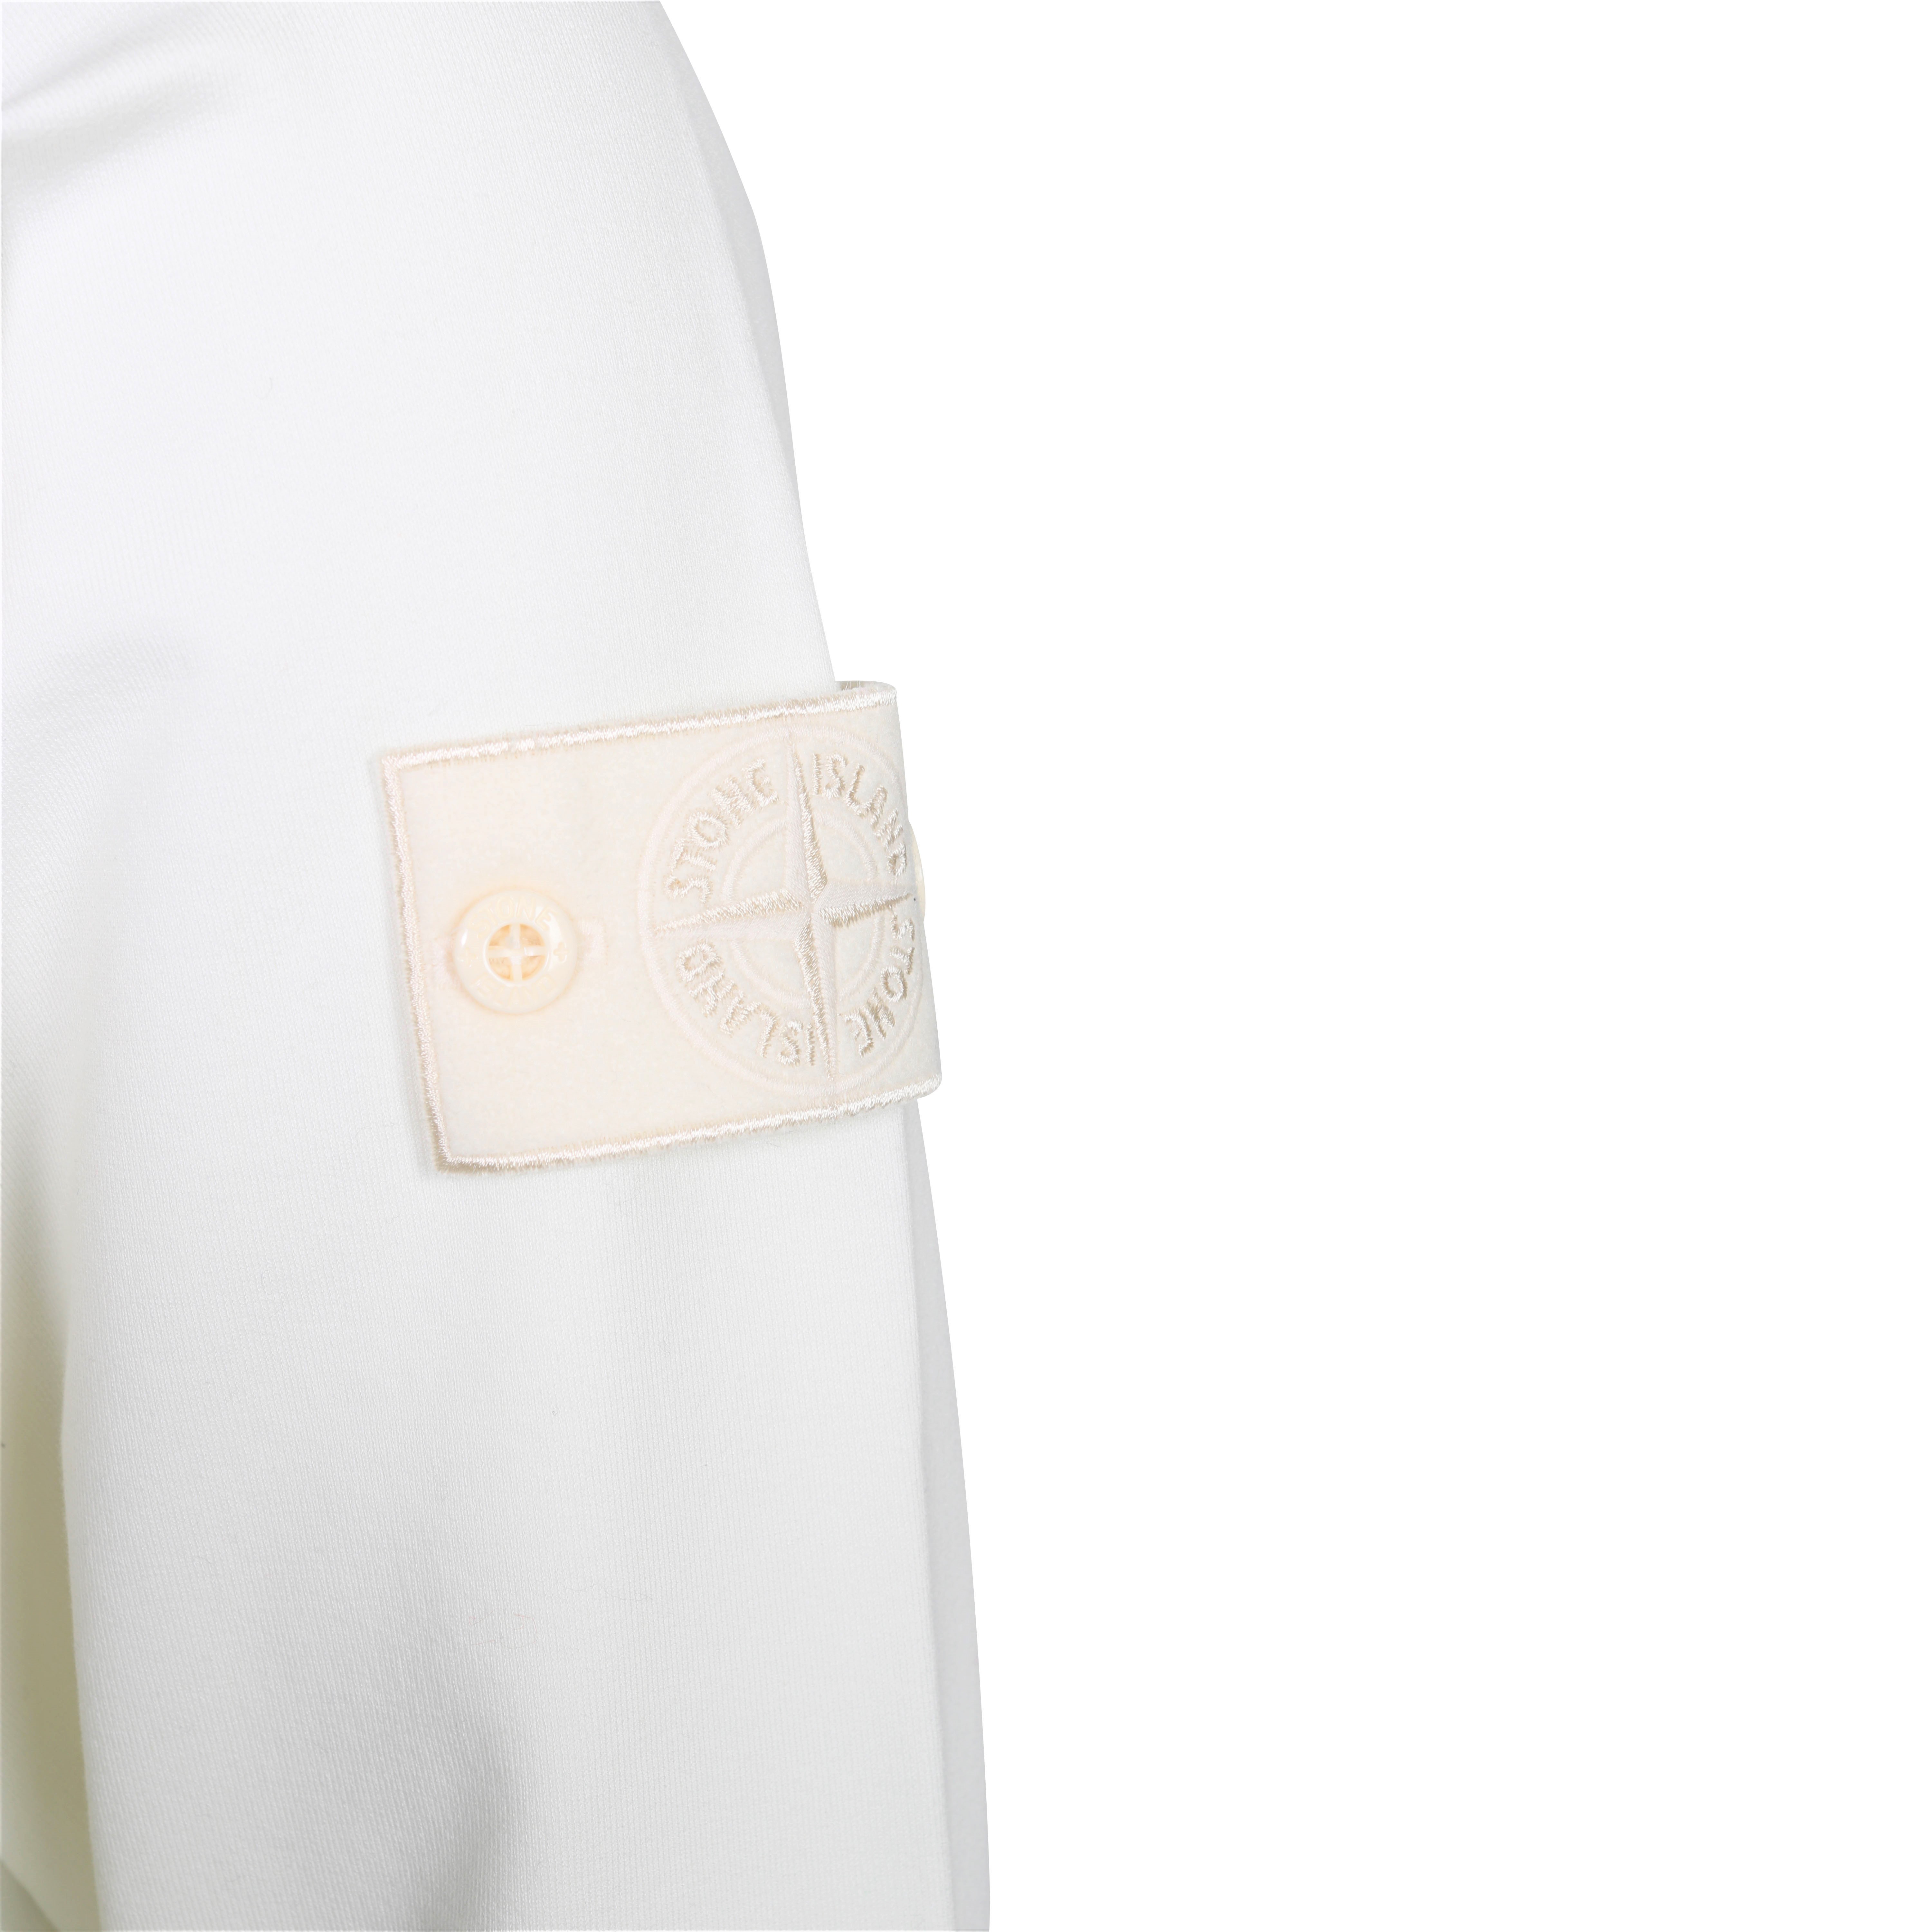 Stone Island Ghost Piece Zip Sweater in Off White L